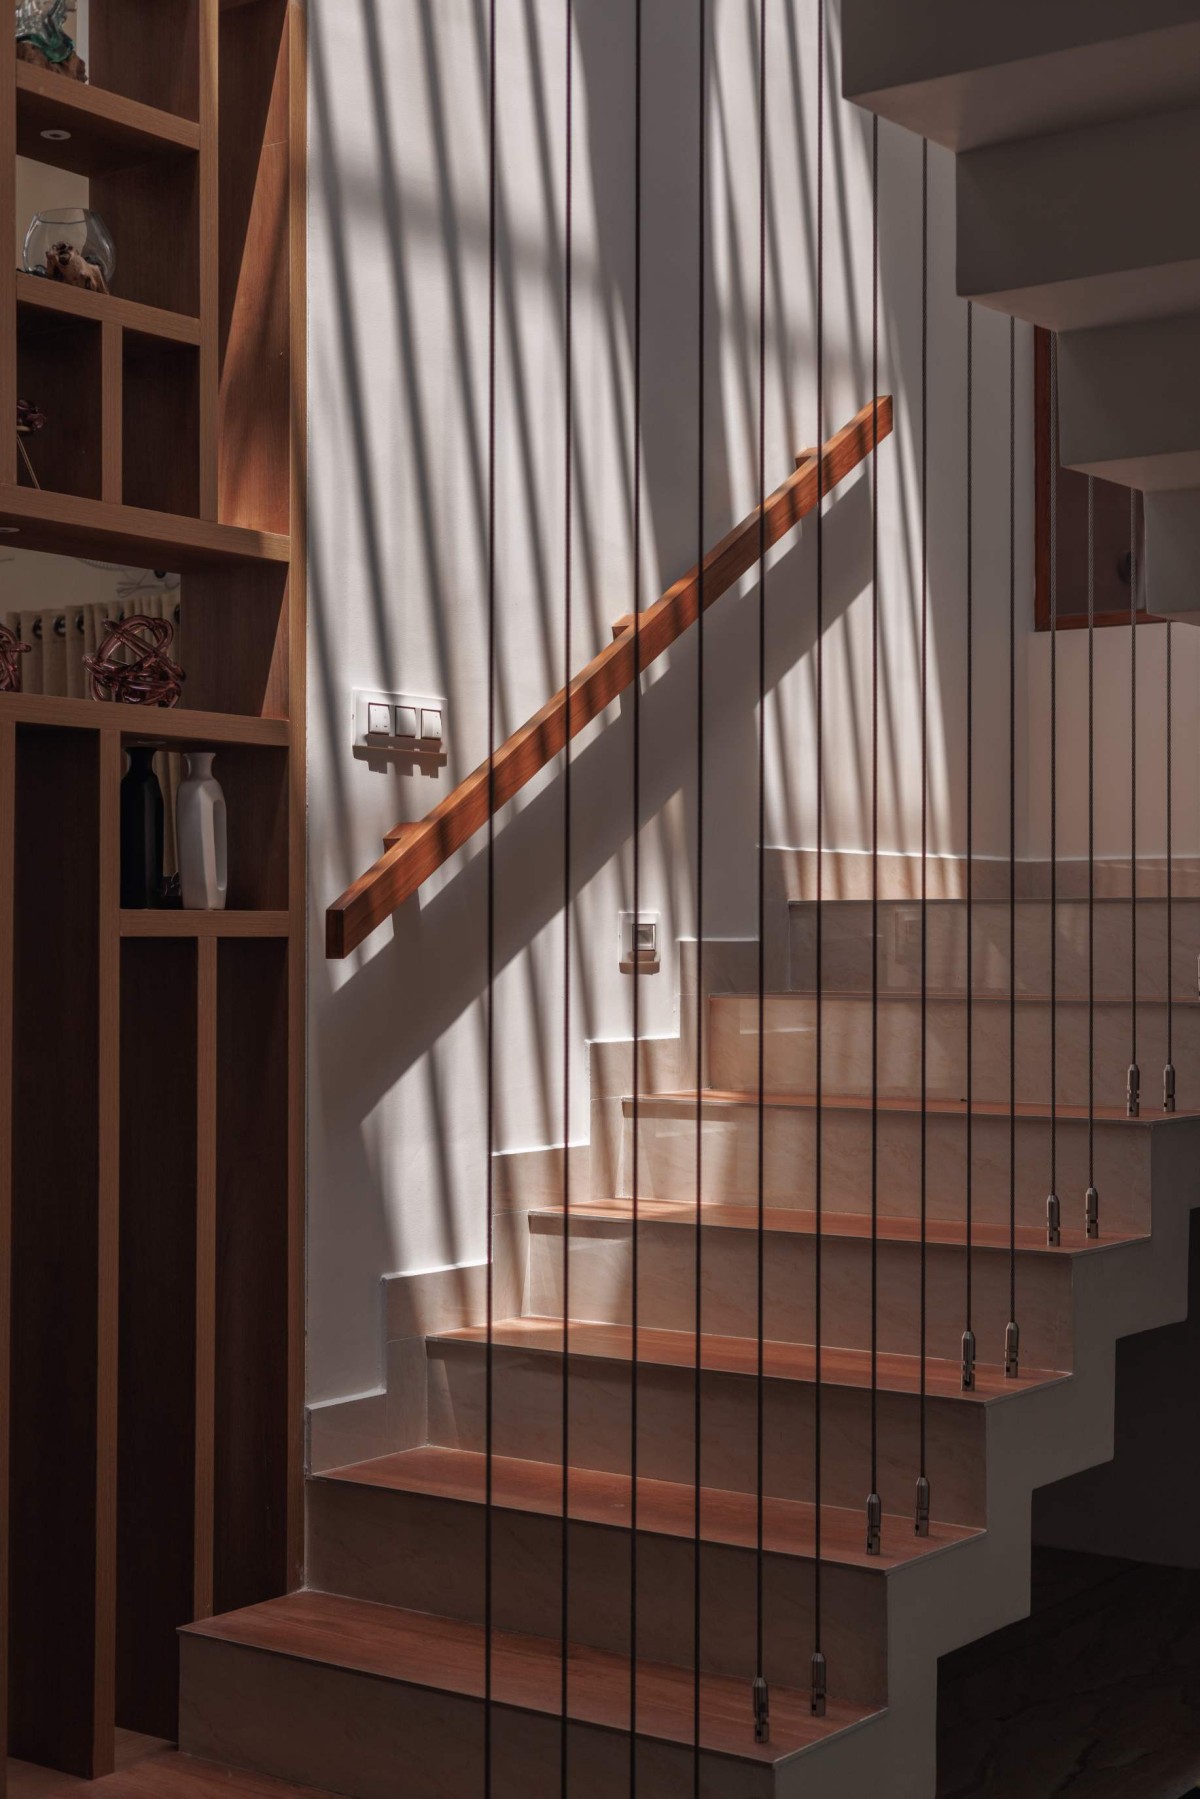 Staircase of Baytal Rahma by Stria Architects